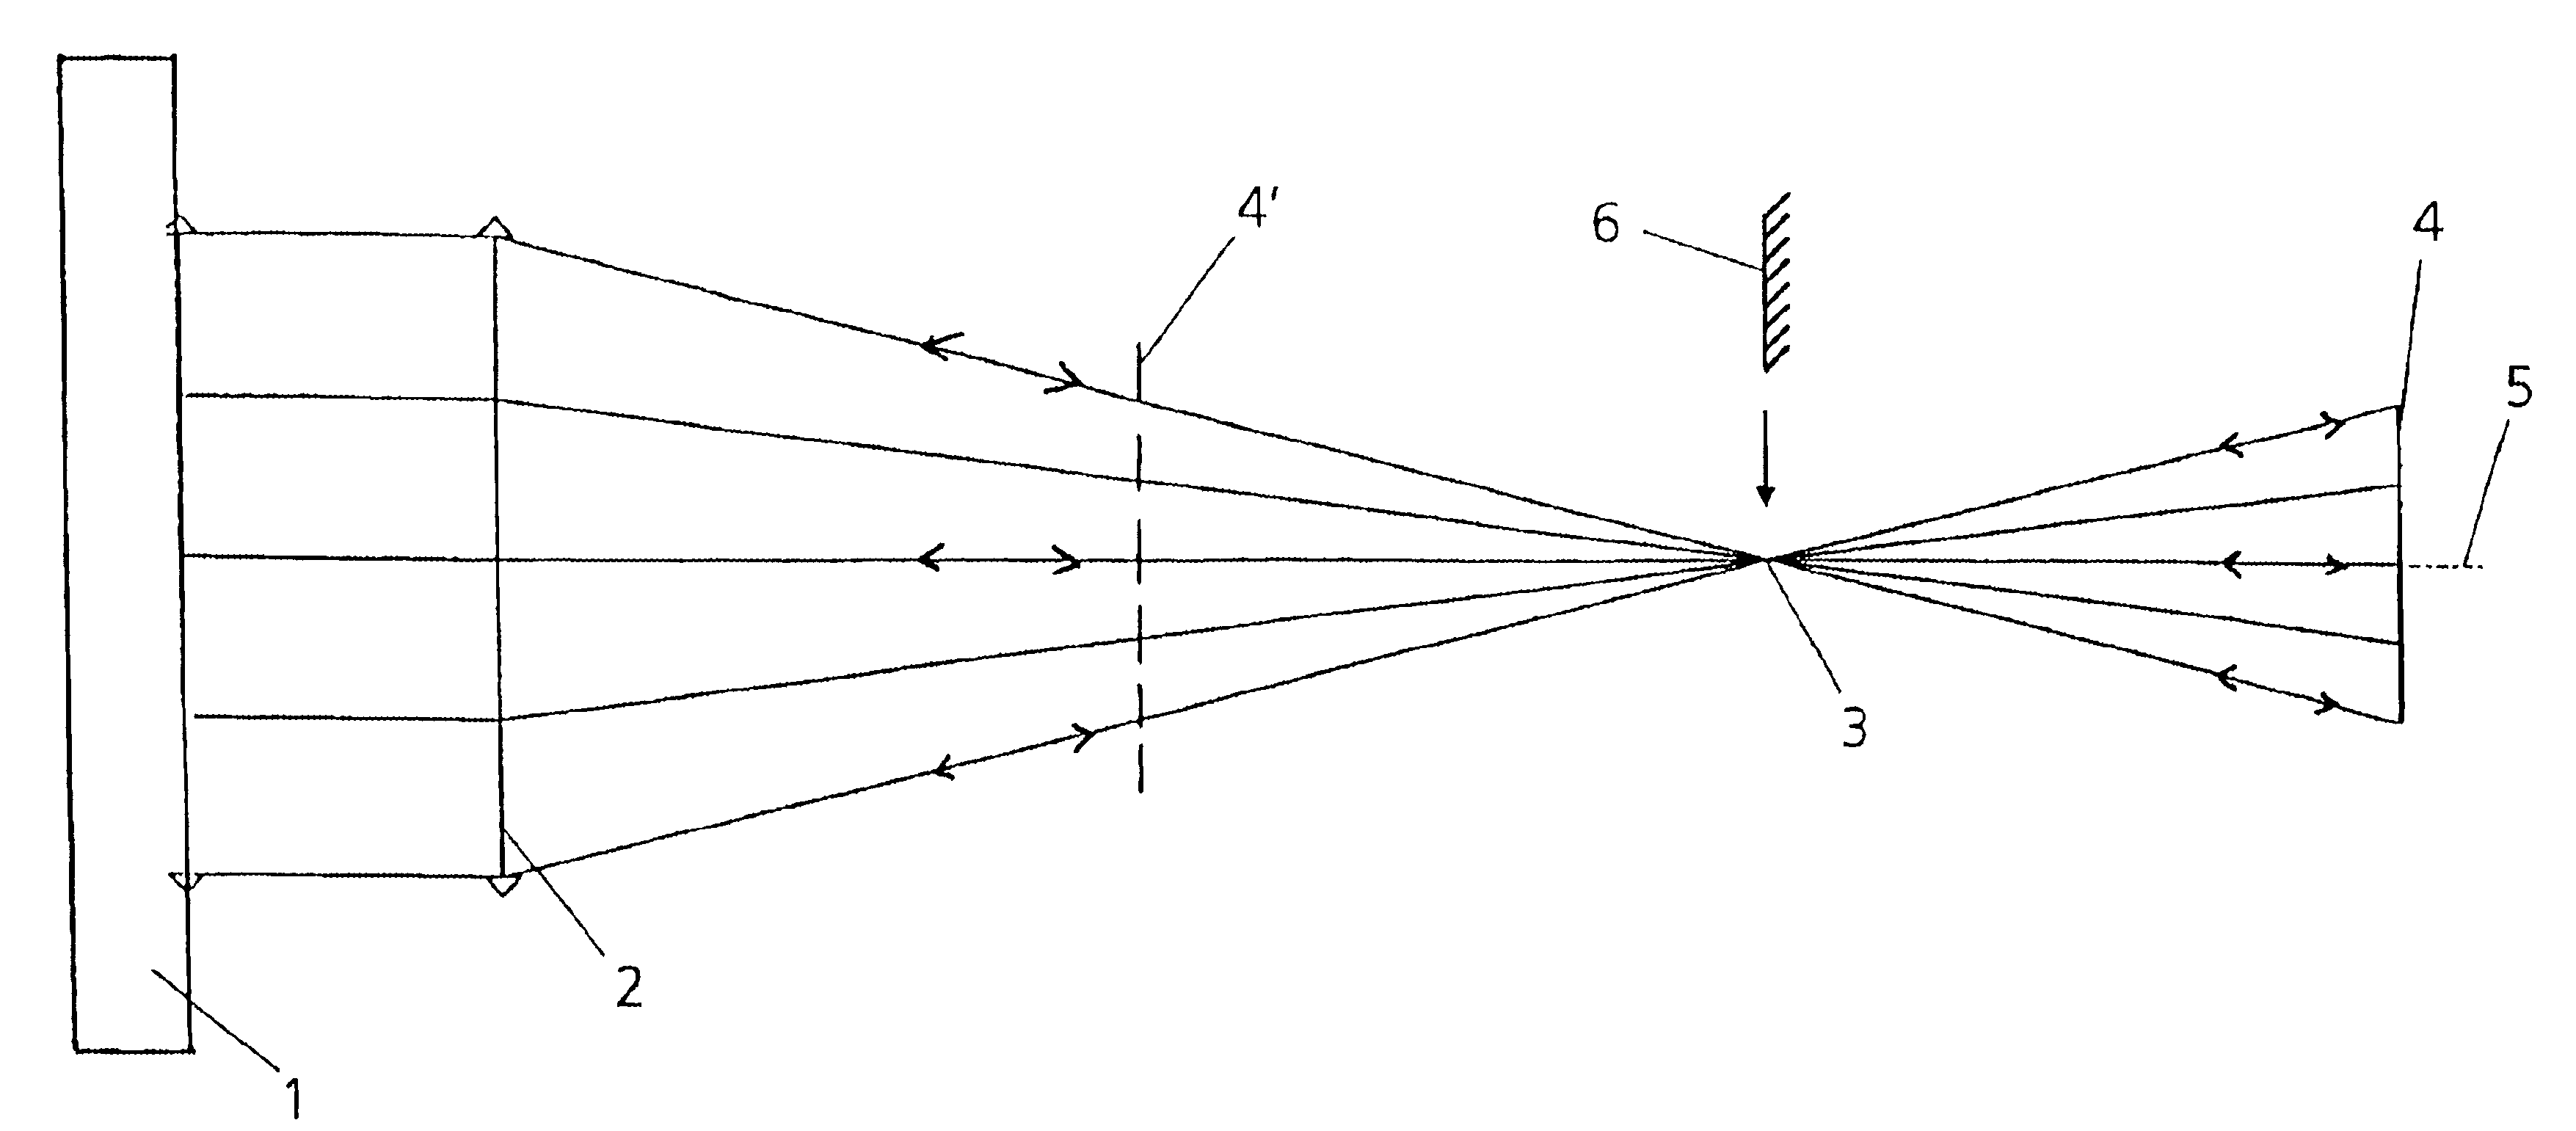 Method for absolute calibration of an interferometer